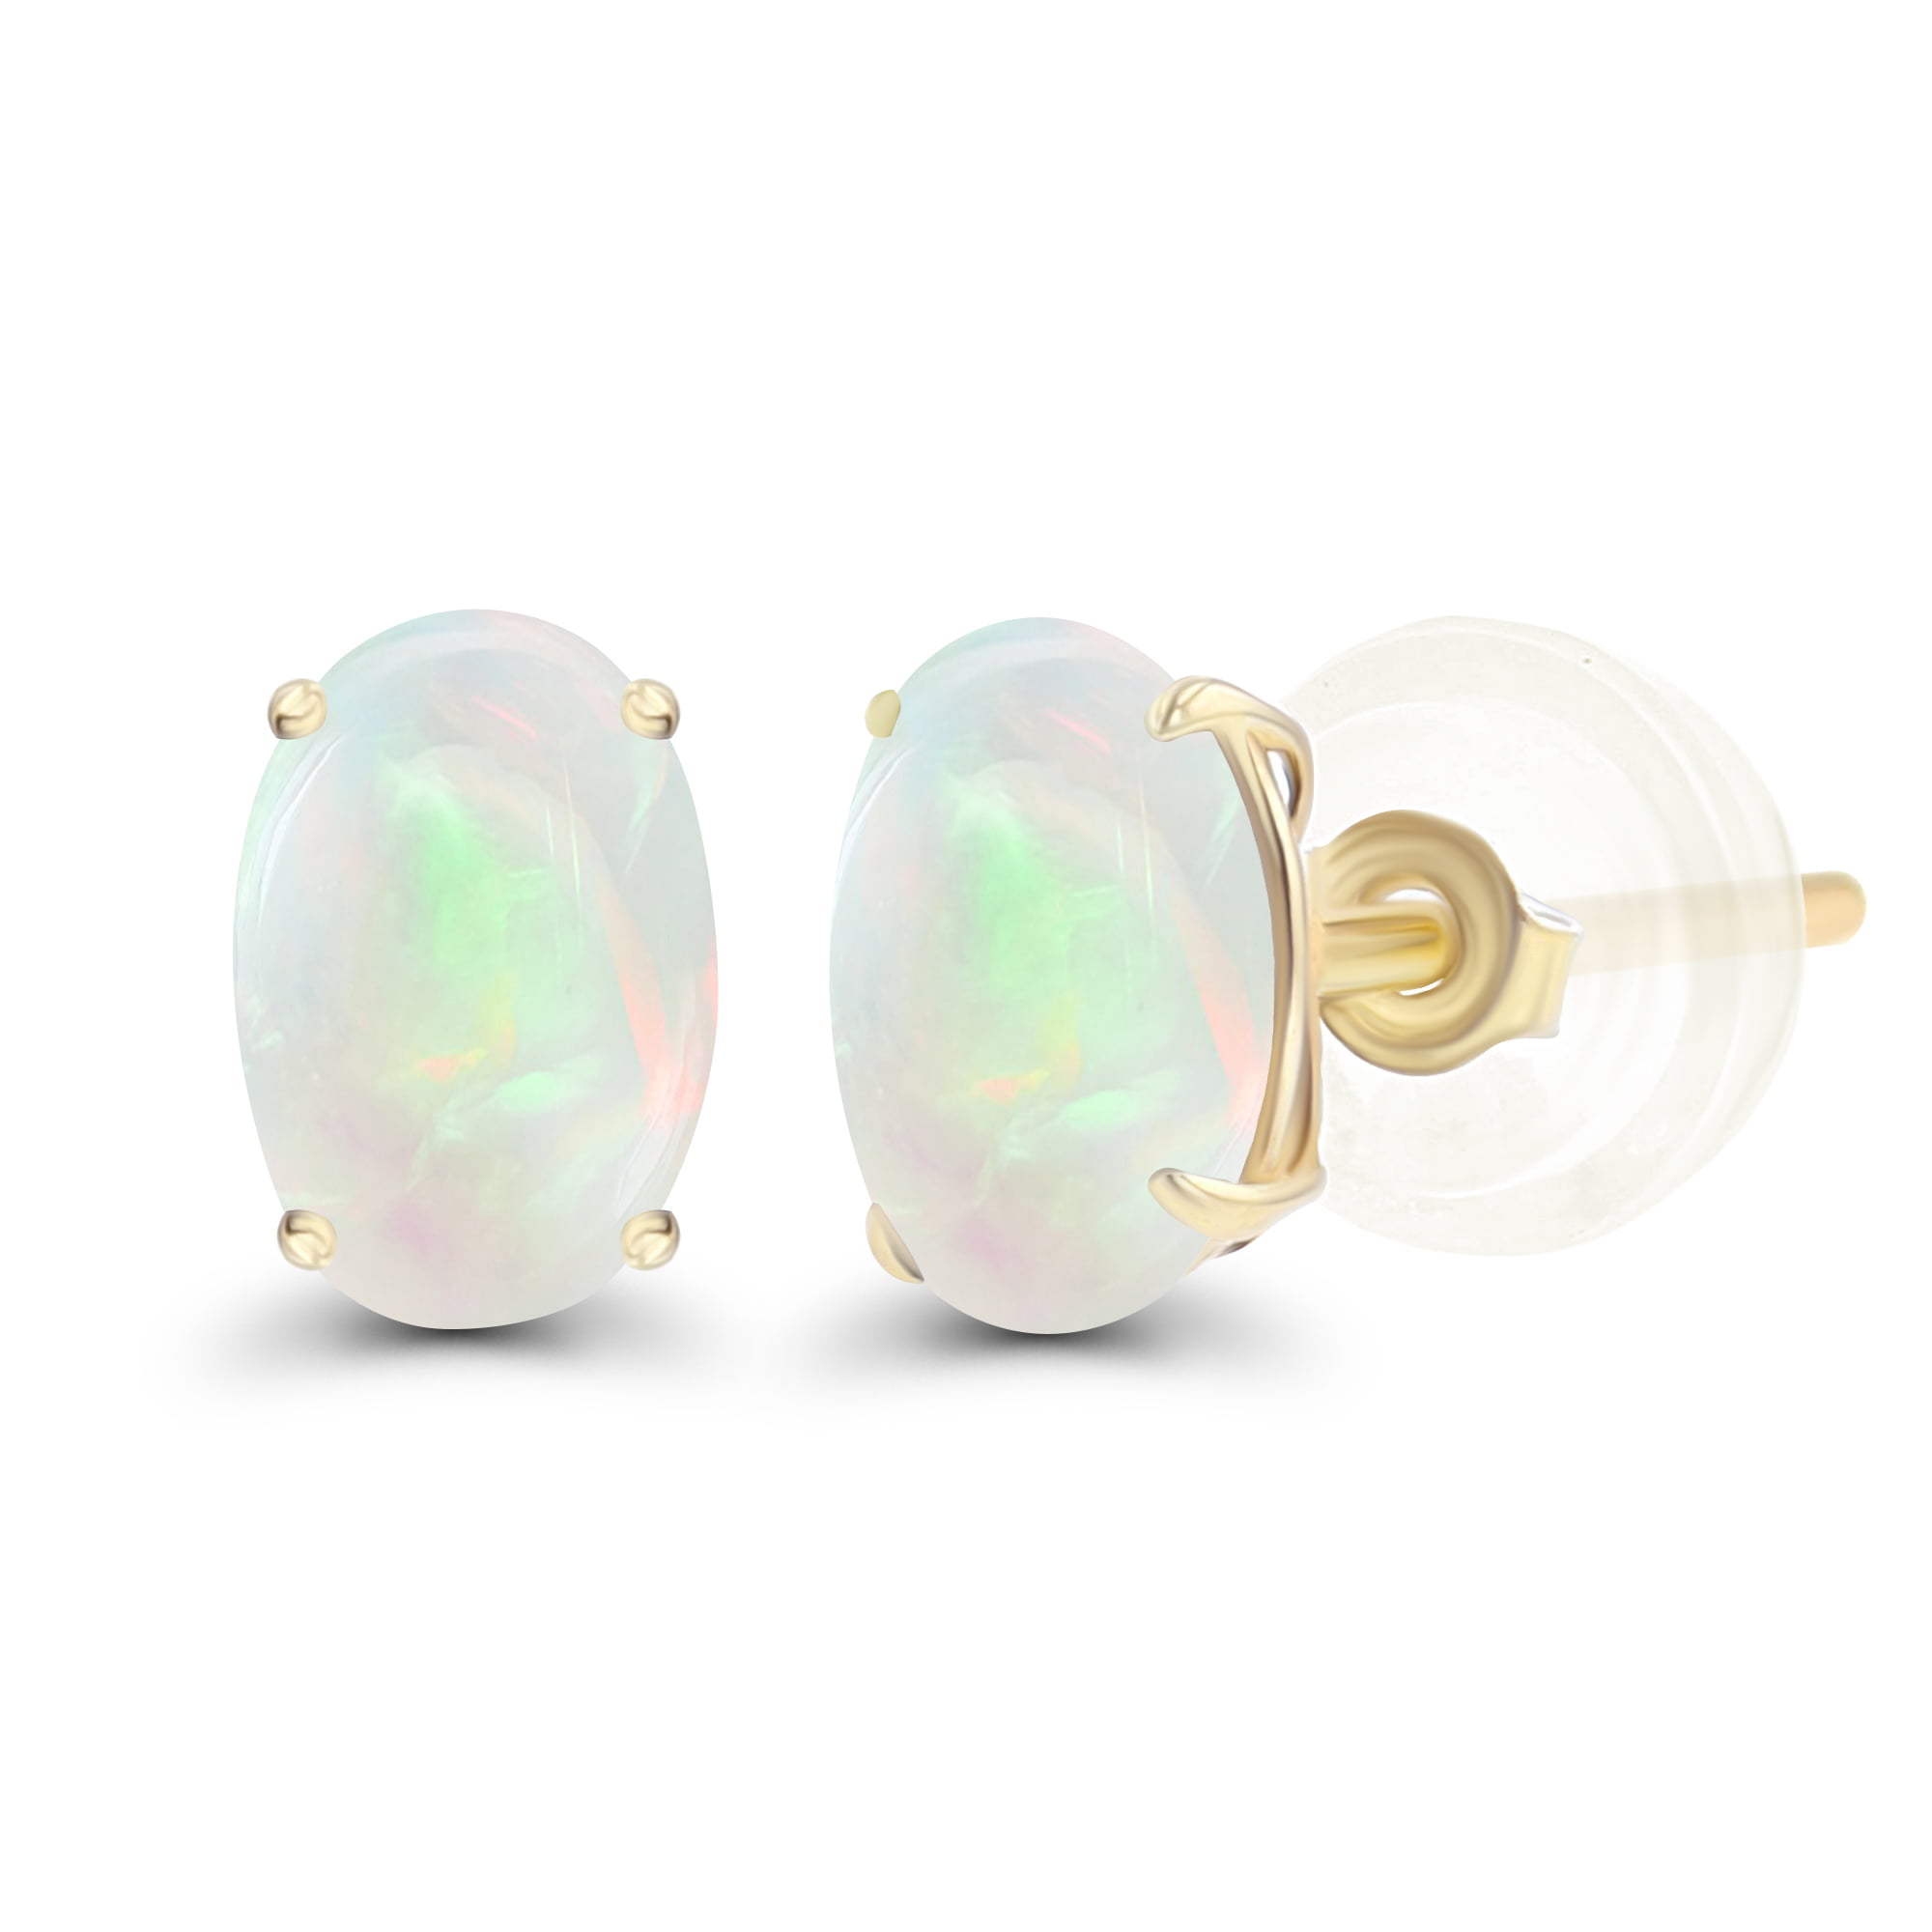 Solid 14K Gold or 14K Gold Plated 925 Sterling Silver Yellow White or Rose Gold 7x5mm Oval Genuine Or Created Gemstone Birthstone Stud Earrings 